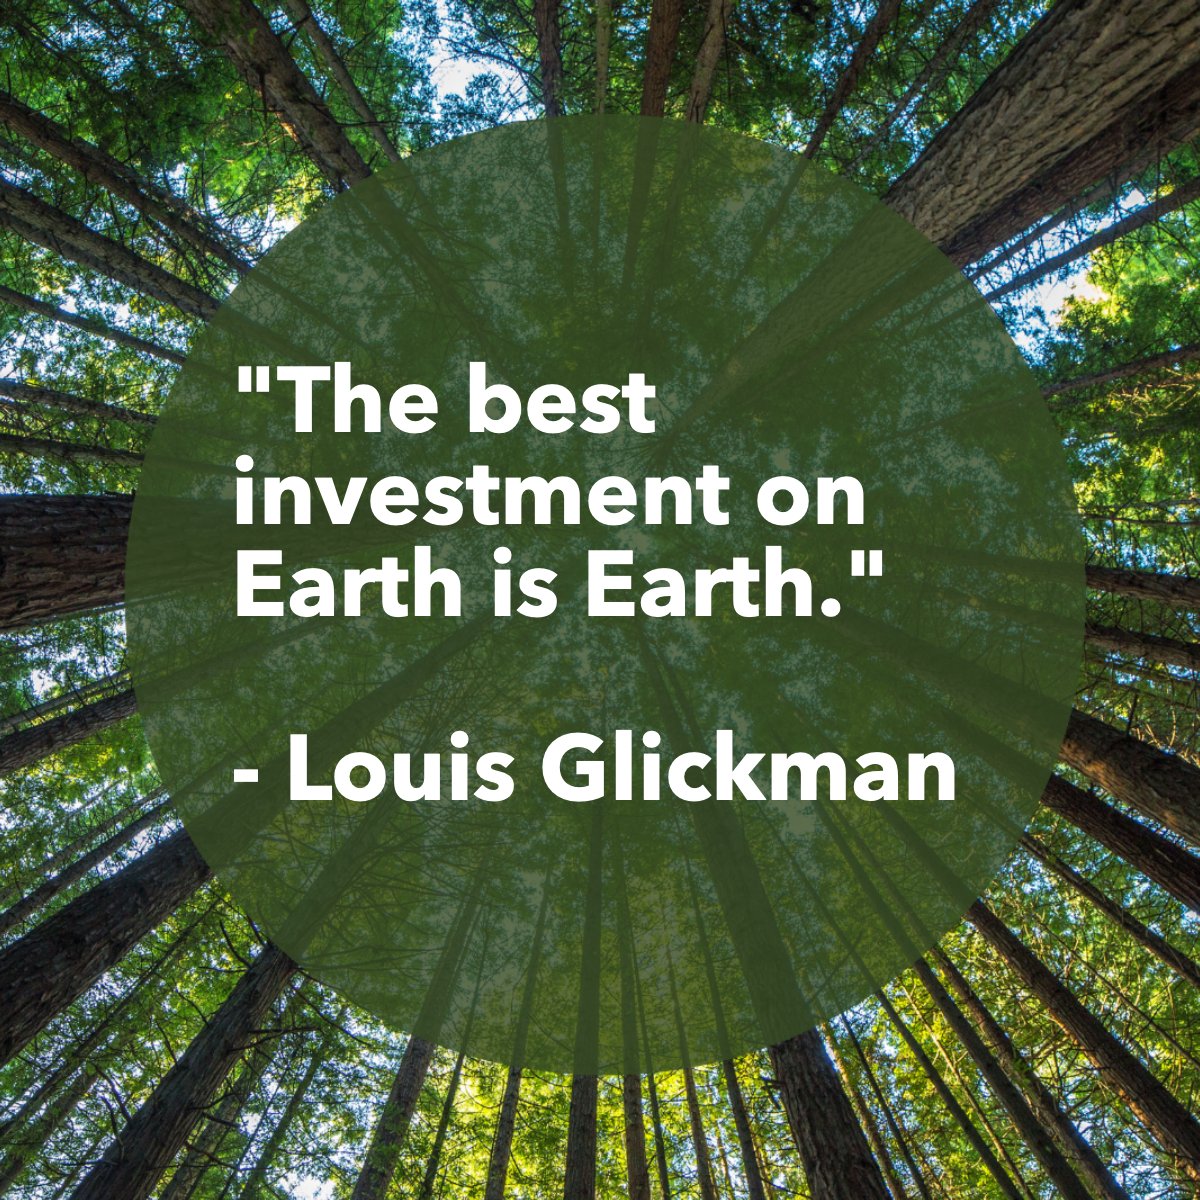 'The best investment on Earth is Earth.'
―Louis Glickman. 🌎

#earthfocus     #earthmover     #investinyourfuture     #saveearth
#barbarabarker #barrettrealestate #barbarabarkerteam #realestate #scottsdale #chandler #queencreek #gilbert #homes #azhomes #sold